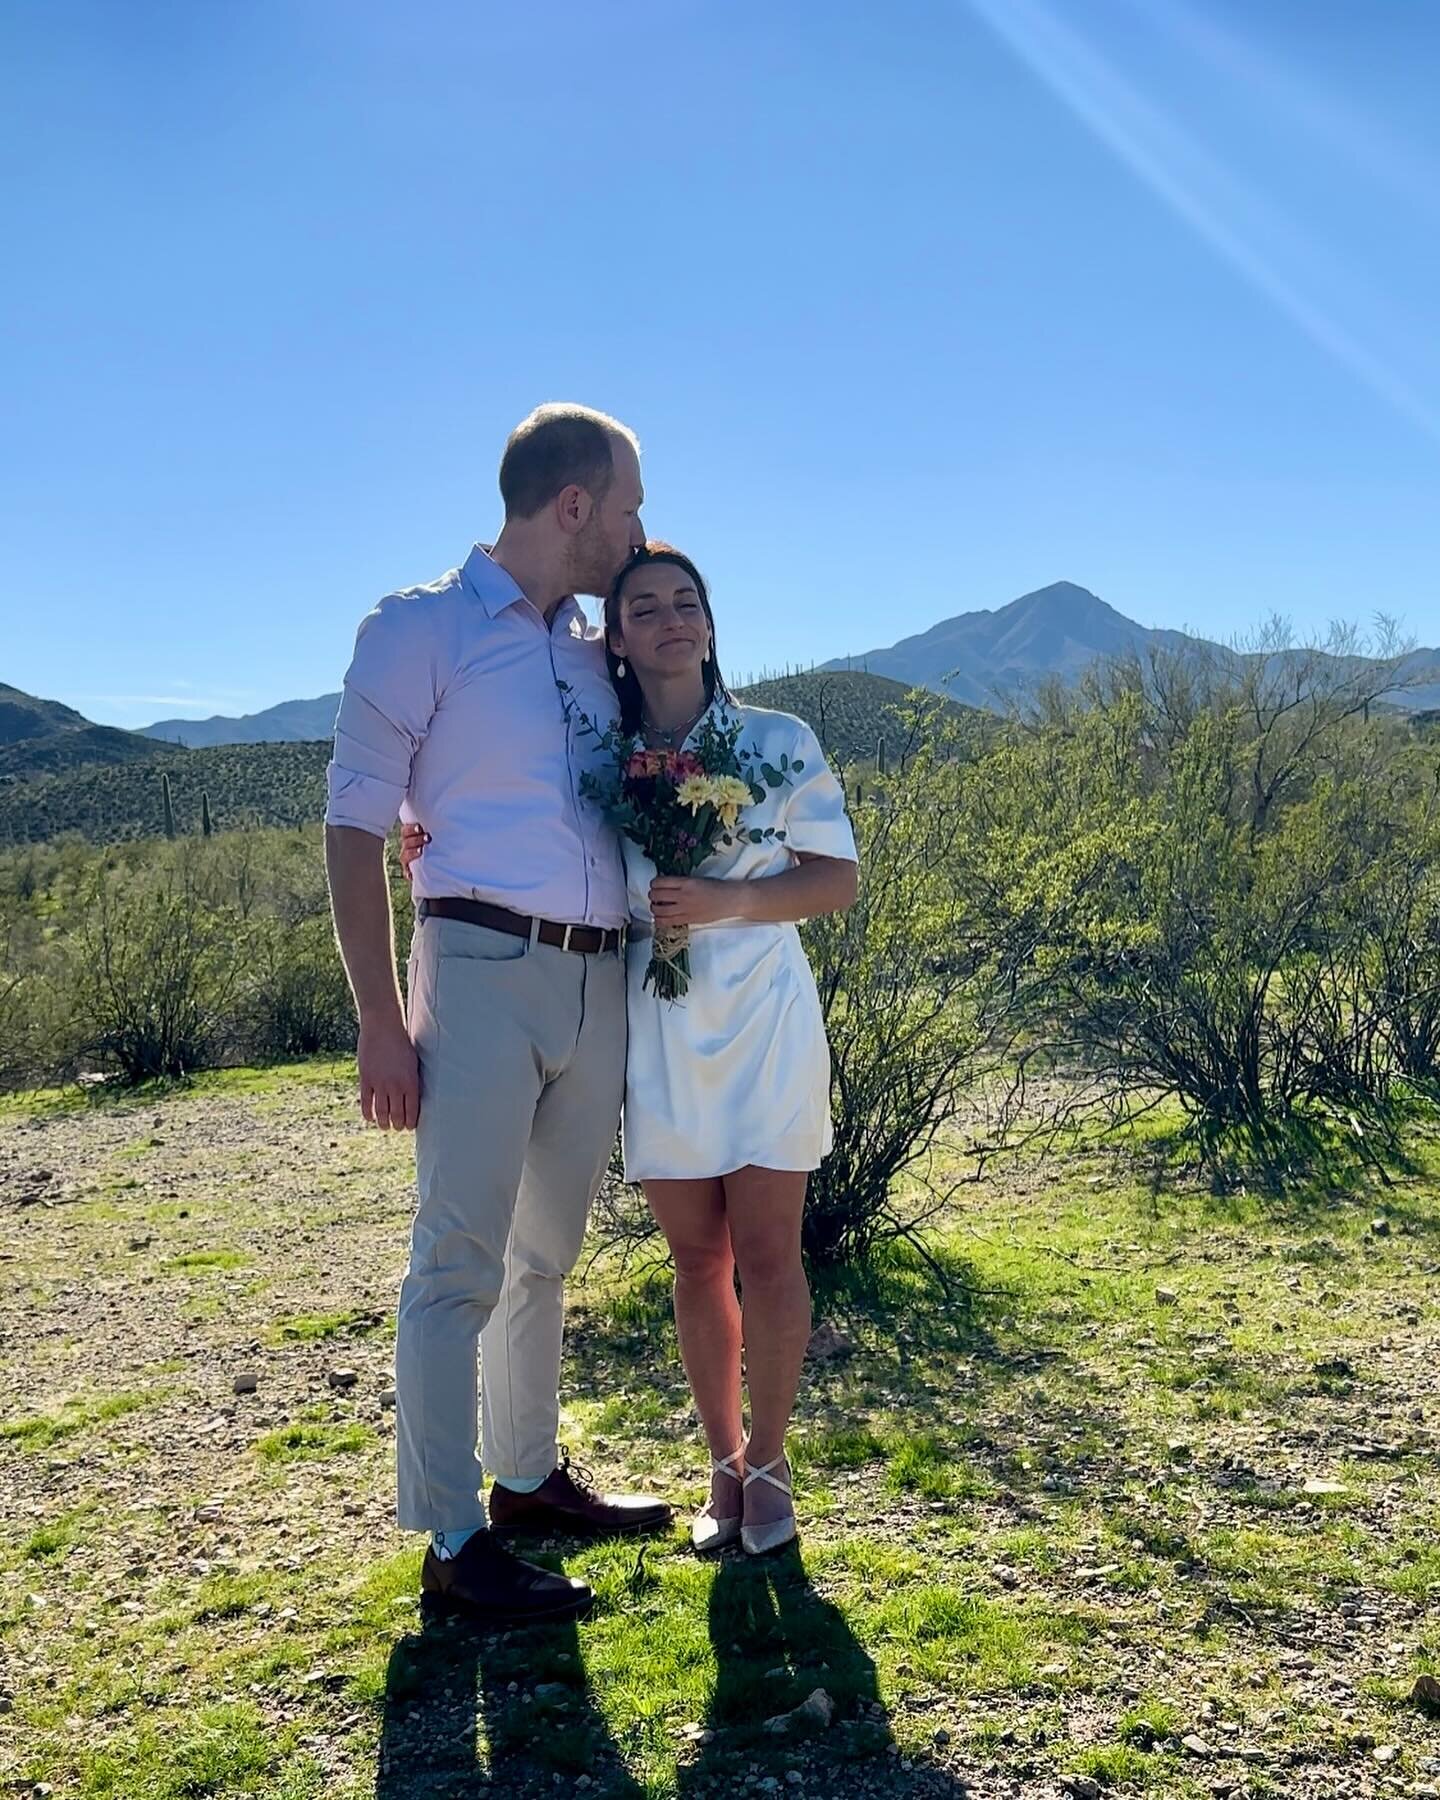 A private chef and a theoretical physicist get married&hellip;

1) friends and tacos for lunch!
2) but first we hiked
3) and then I made everyone cold plunge 🤣
4) we prayed to chlorine jesus
5) eye dust time
6) besties 👯&zwj;♀️
7) more food!
8) wed